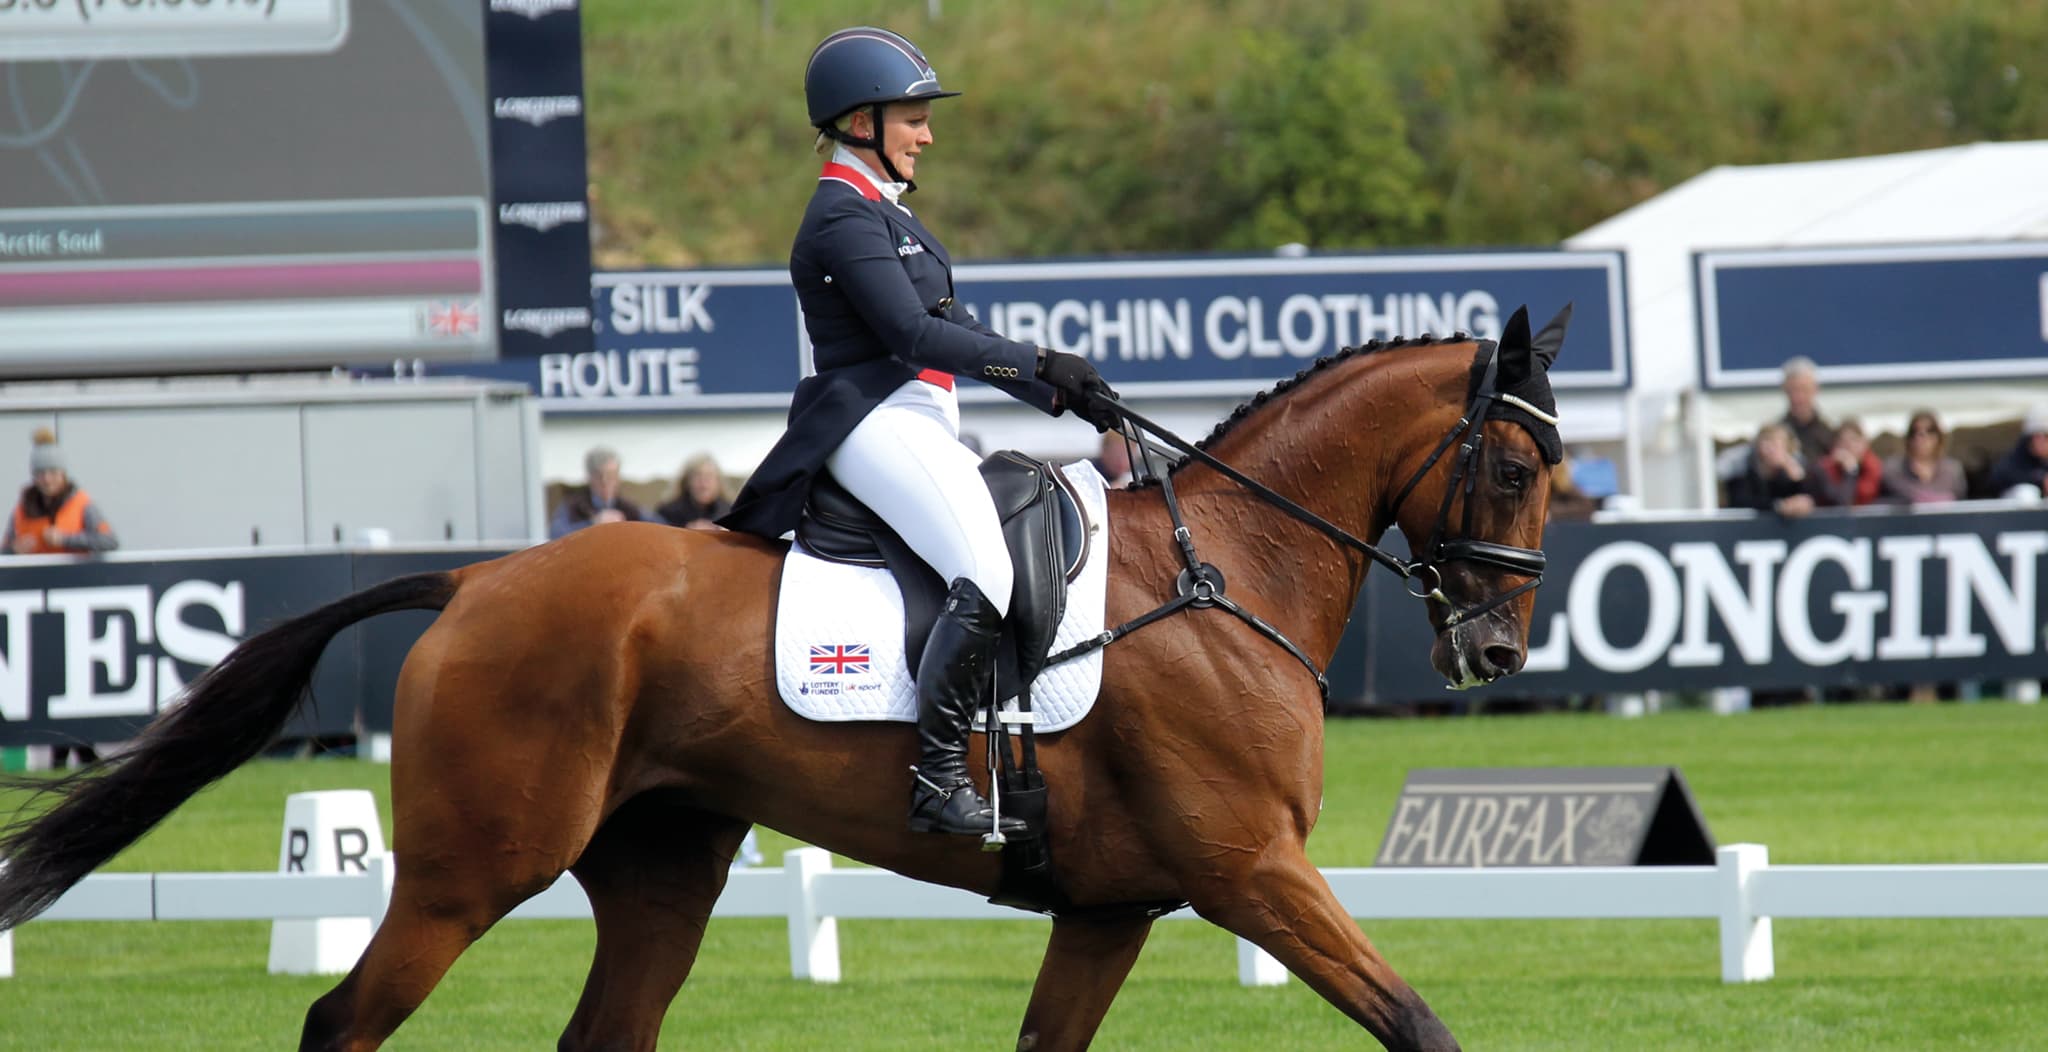 EQU Streamz advanced magnetic horse bands sponsored by Gemma tattersall for Team GB 3-day eventing international. Endorses EQU bands for use both pre and post exercise on her olympic horses. 